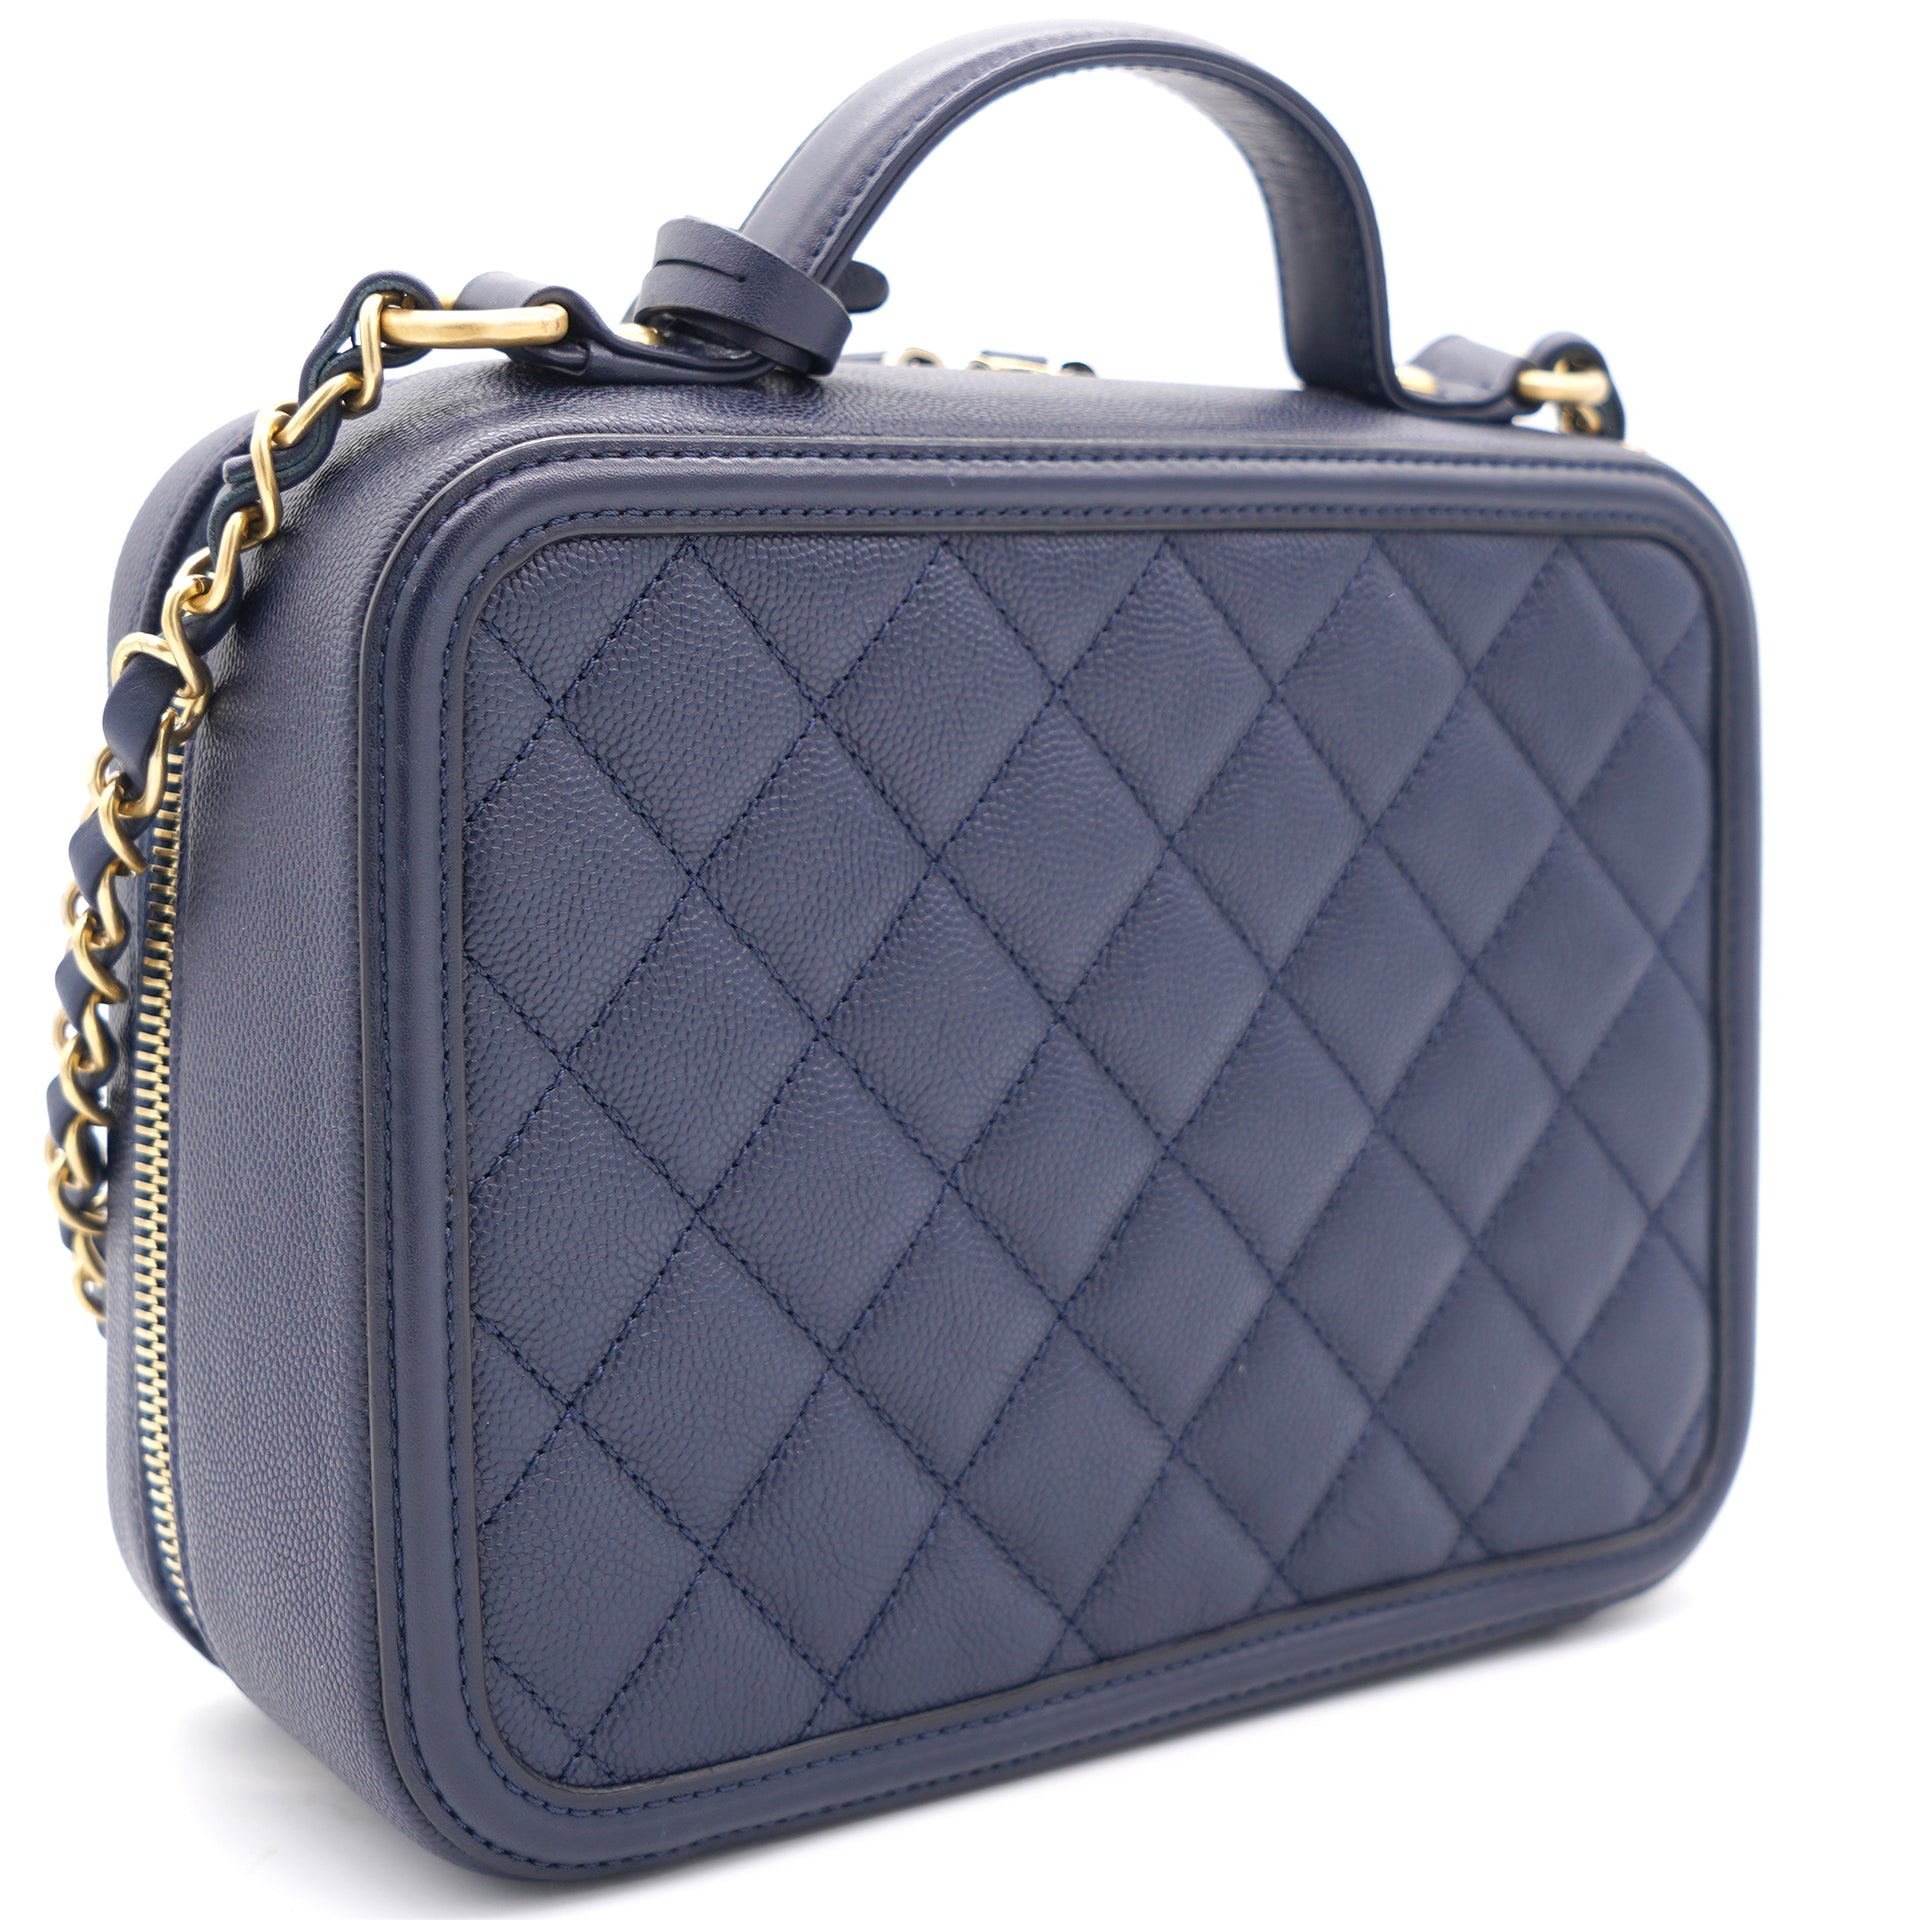 Chanel Navy Blue/Black Quilted Leather Small CC Filigree Vanity Case Bag  Chanel